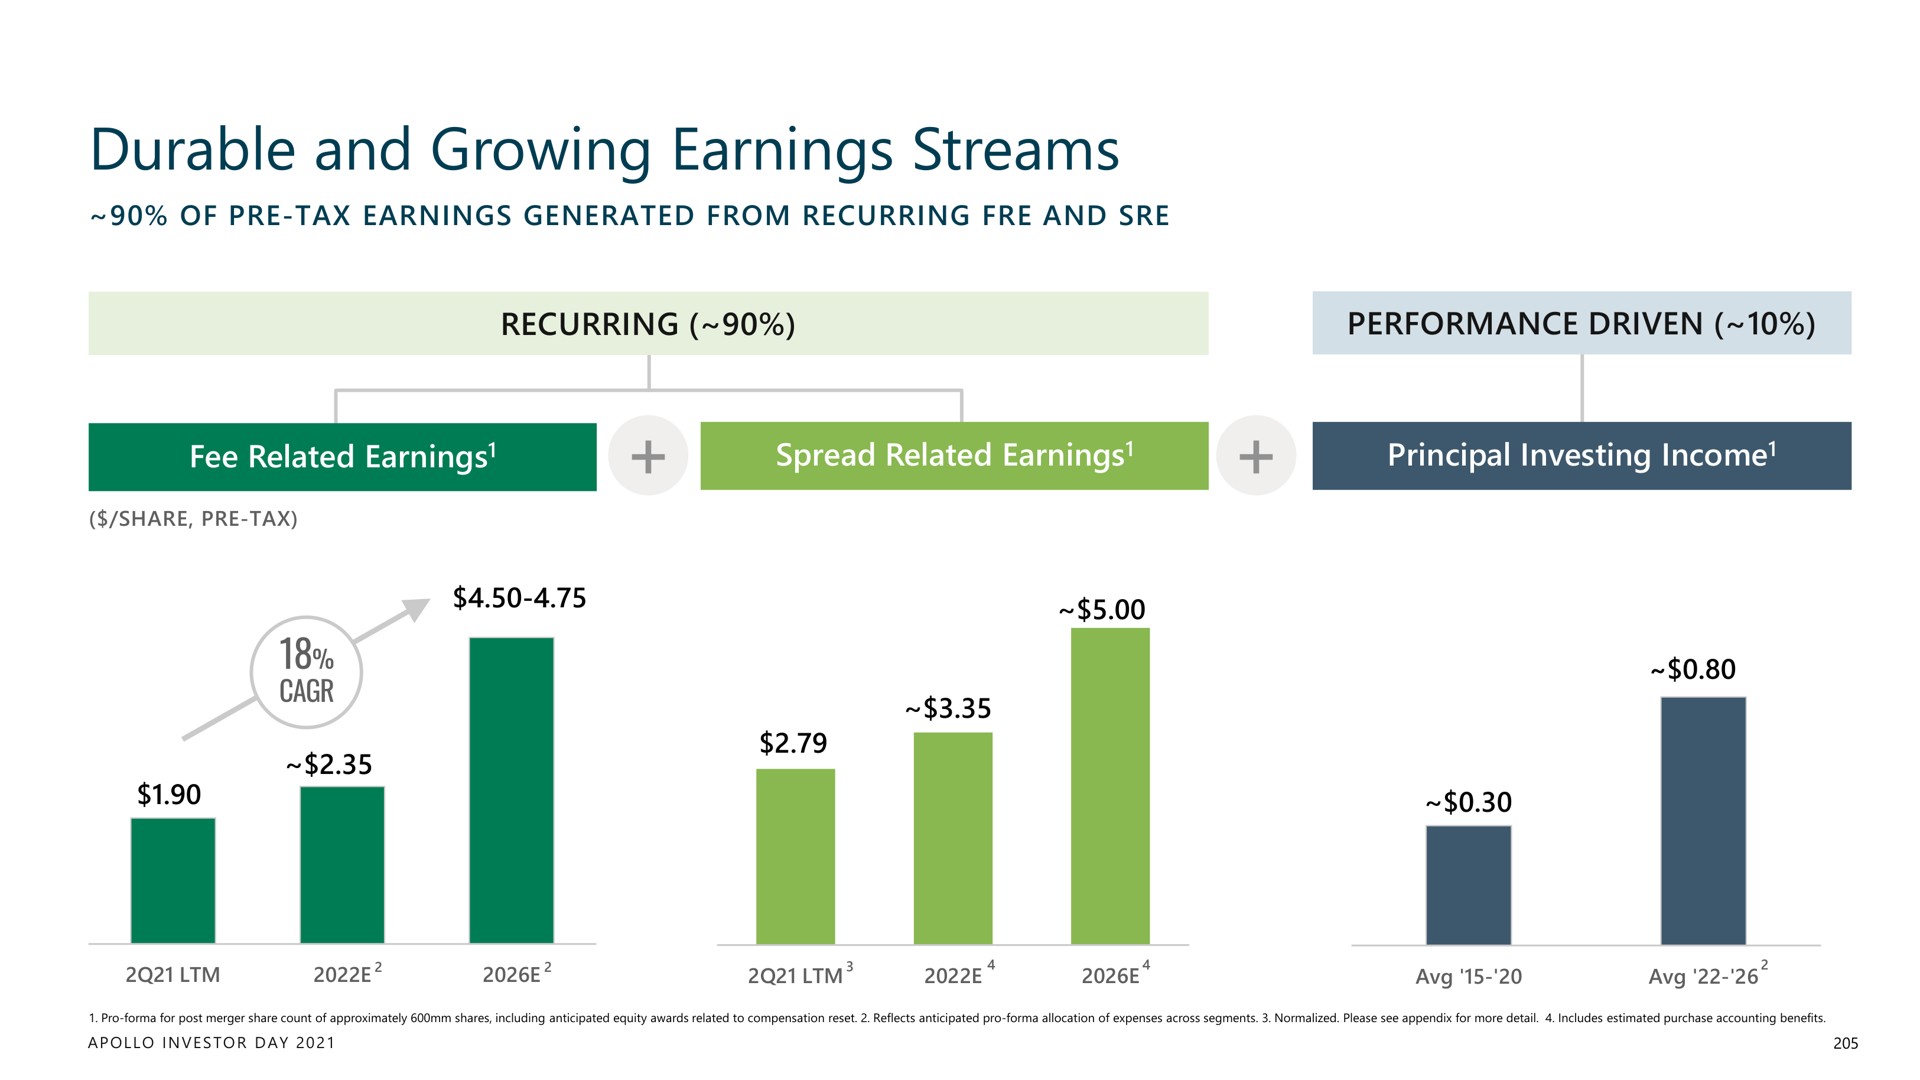 durable and growing earnings streams | Apollo Global Management